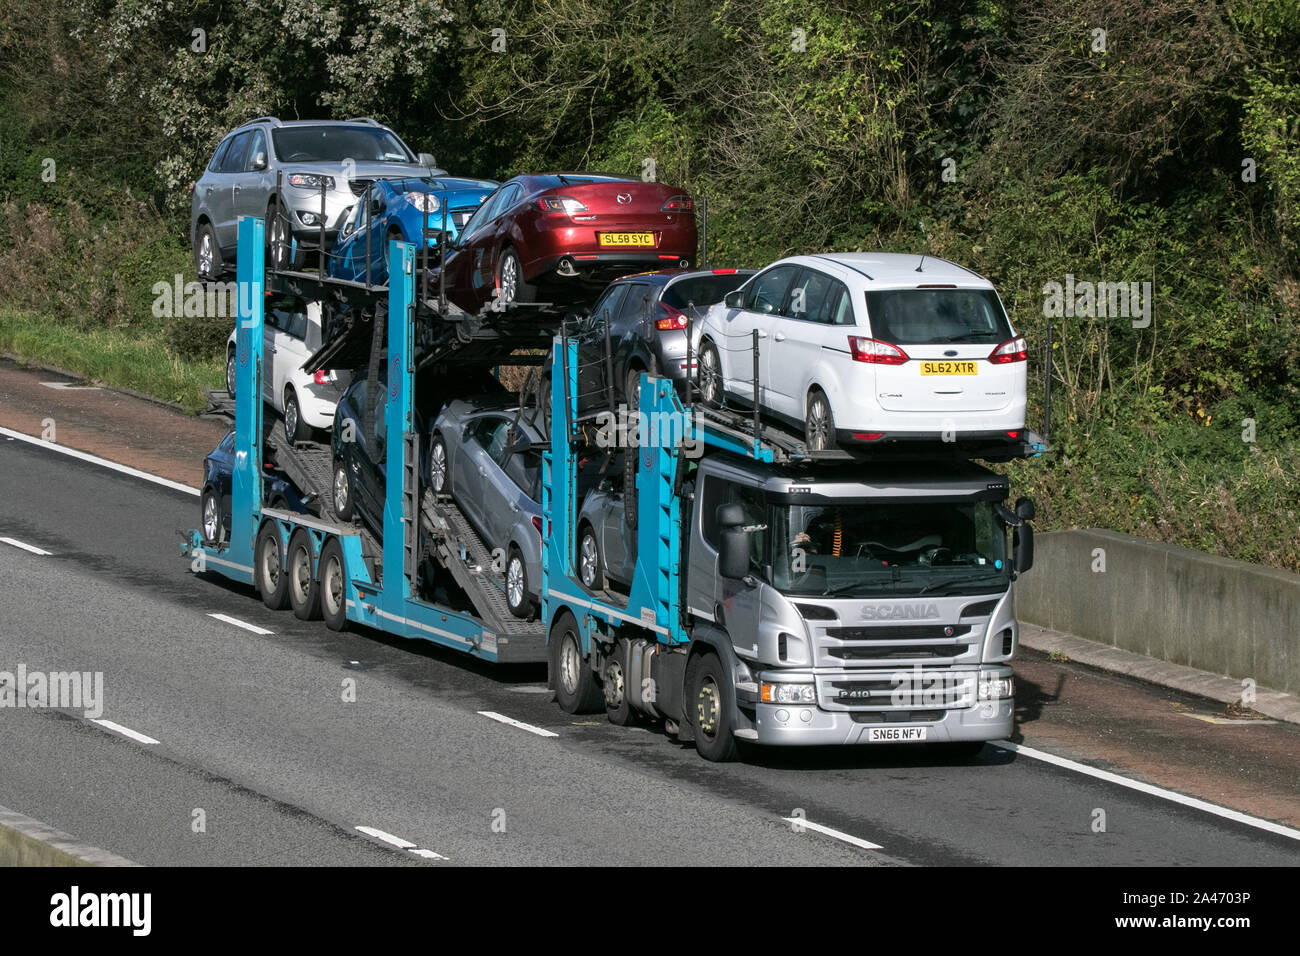 A Scania heavy goods vehicle hgv transporting second hand cars on trailer southbound on the M6 motorway near Preston in Lancashire, UK Stock Photo